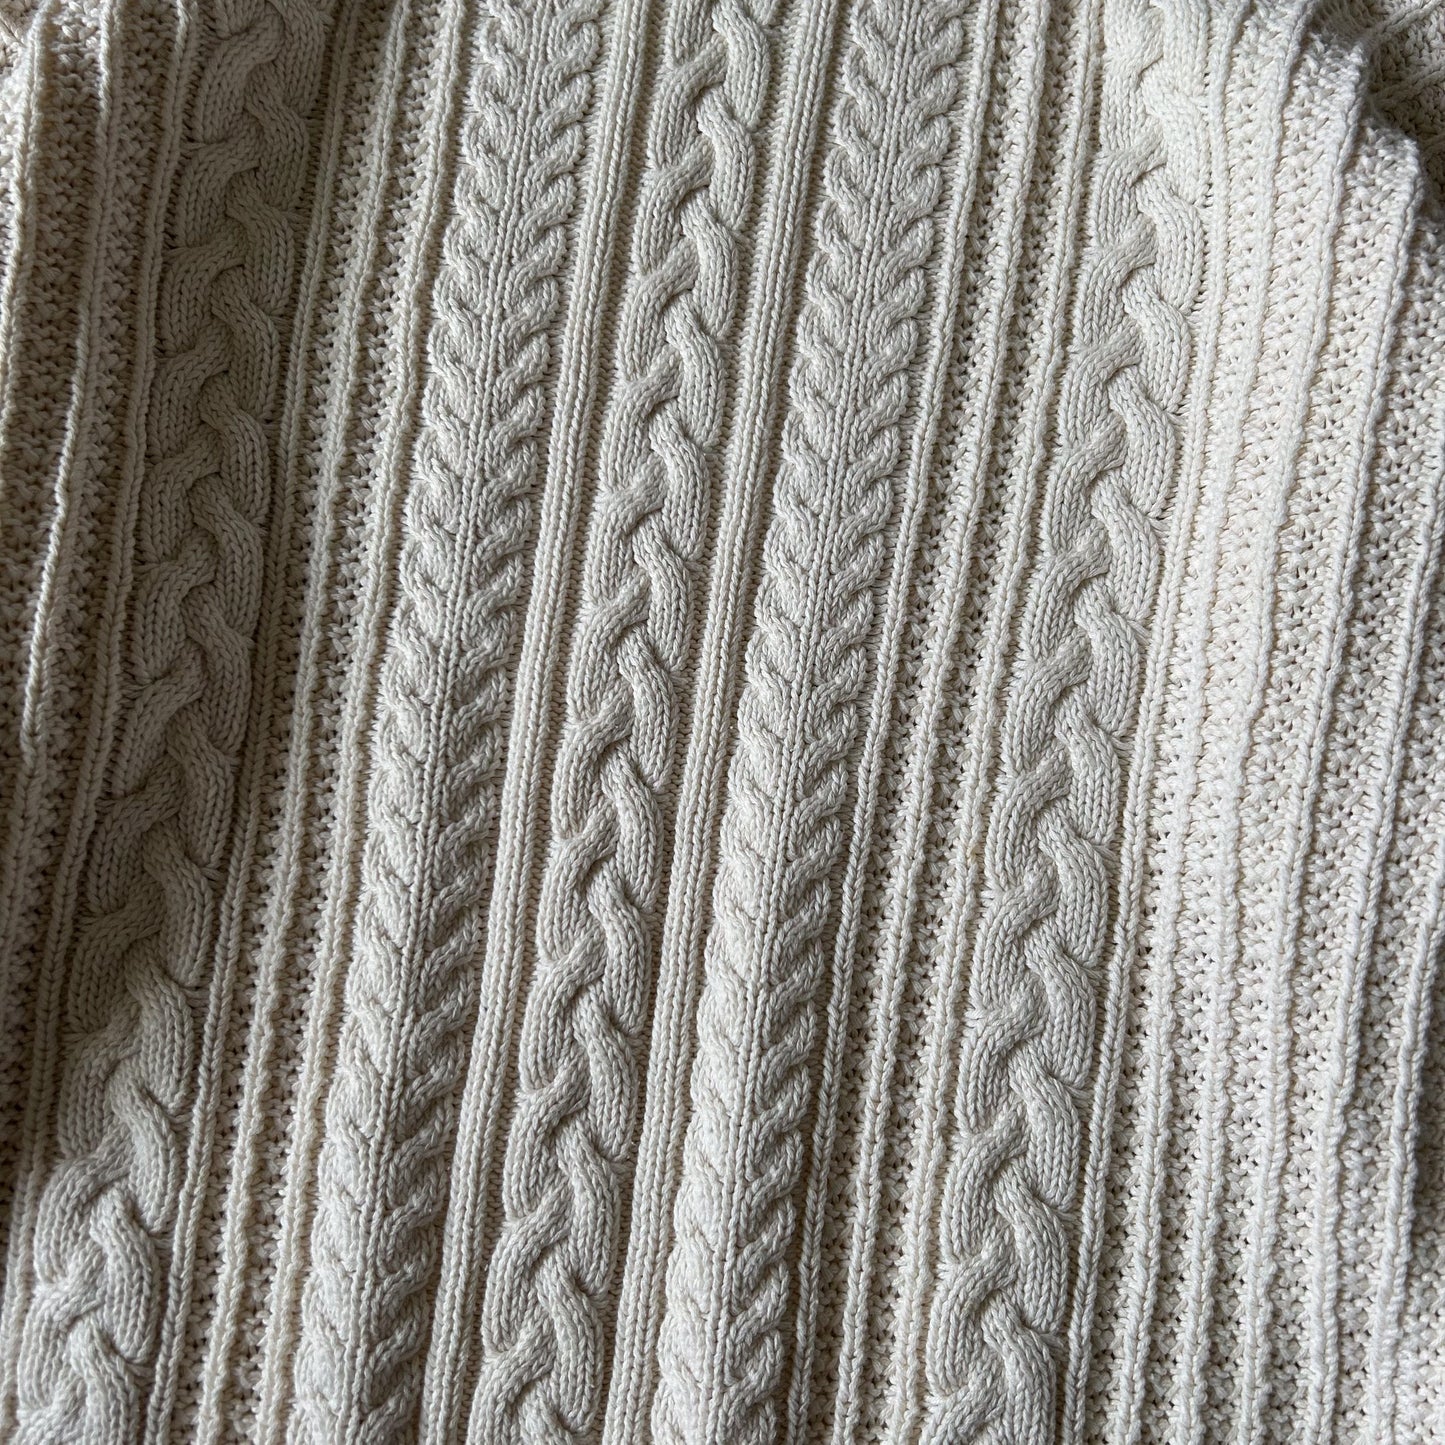 1990s - cable knitted pattern roll neck jumper